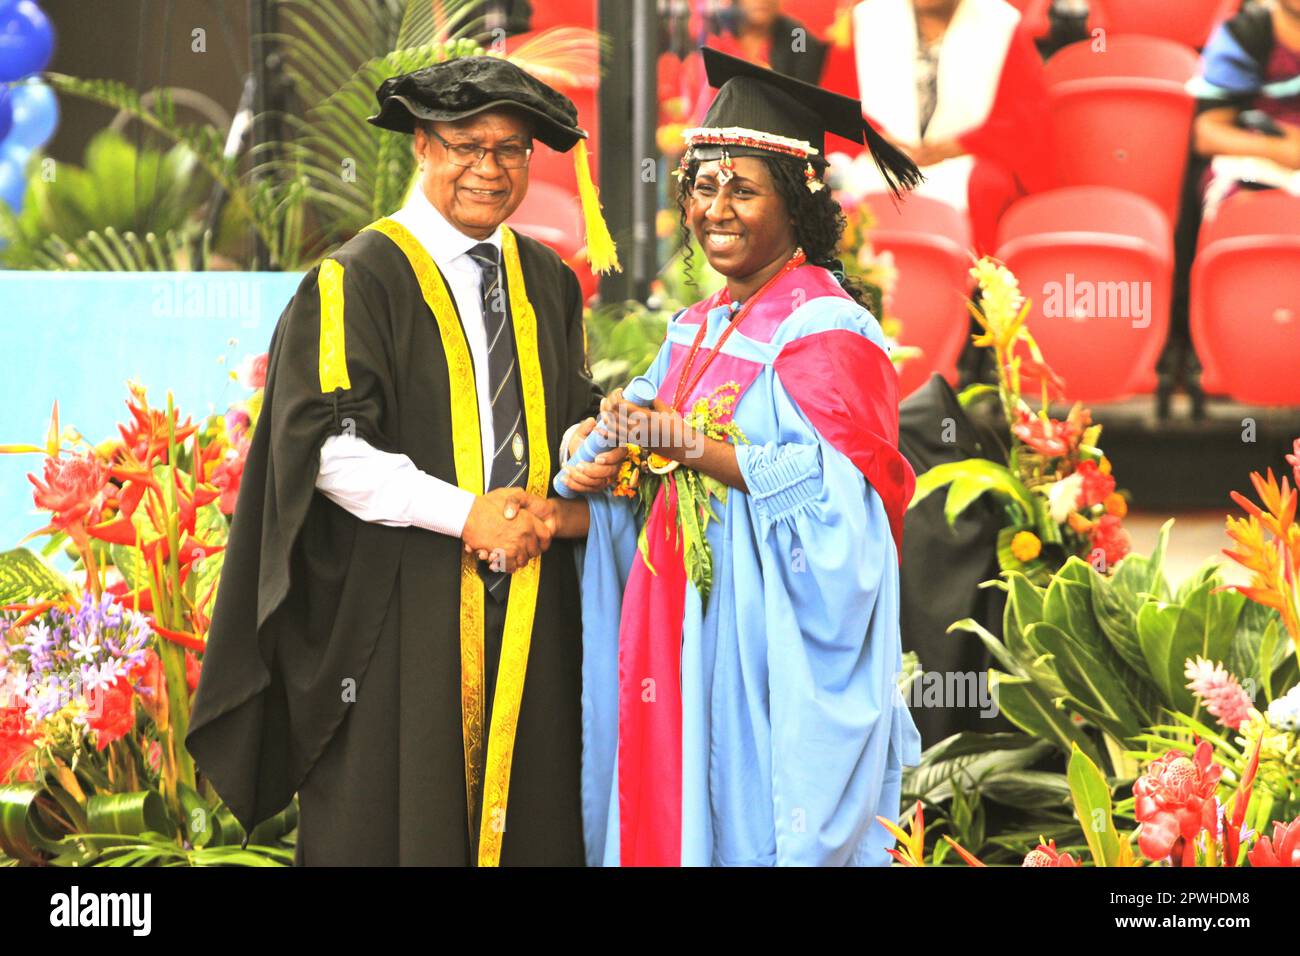 A female graduate receiving her diploma from the UPNG Vice Chancellor Stock Photo